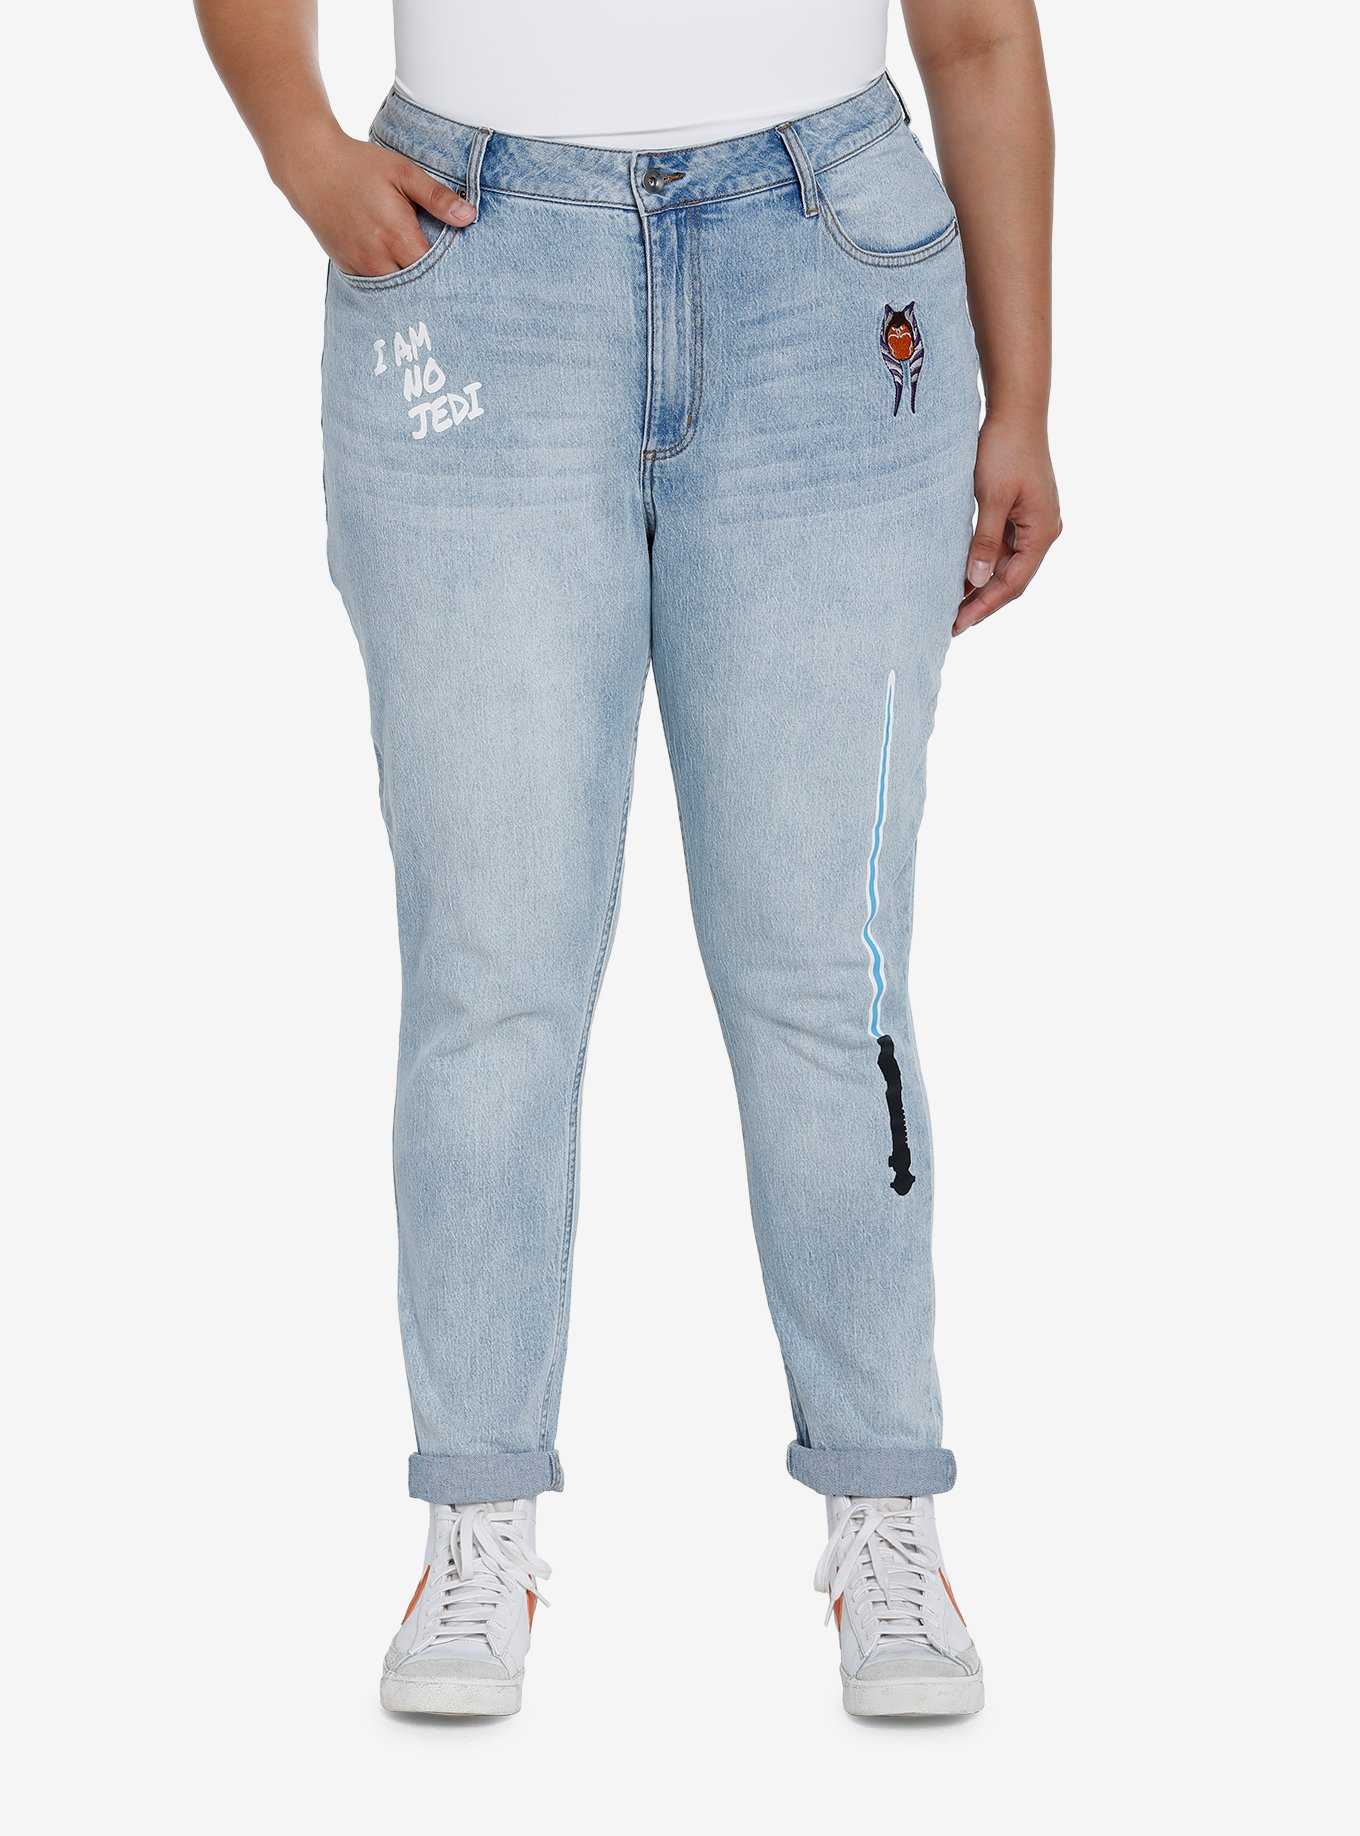 Her Universe Star Wars Ahsoka Mom Jeans Plus Size Her Universe Exclusive, , hi-res